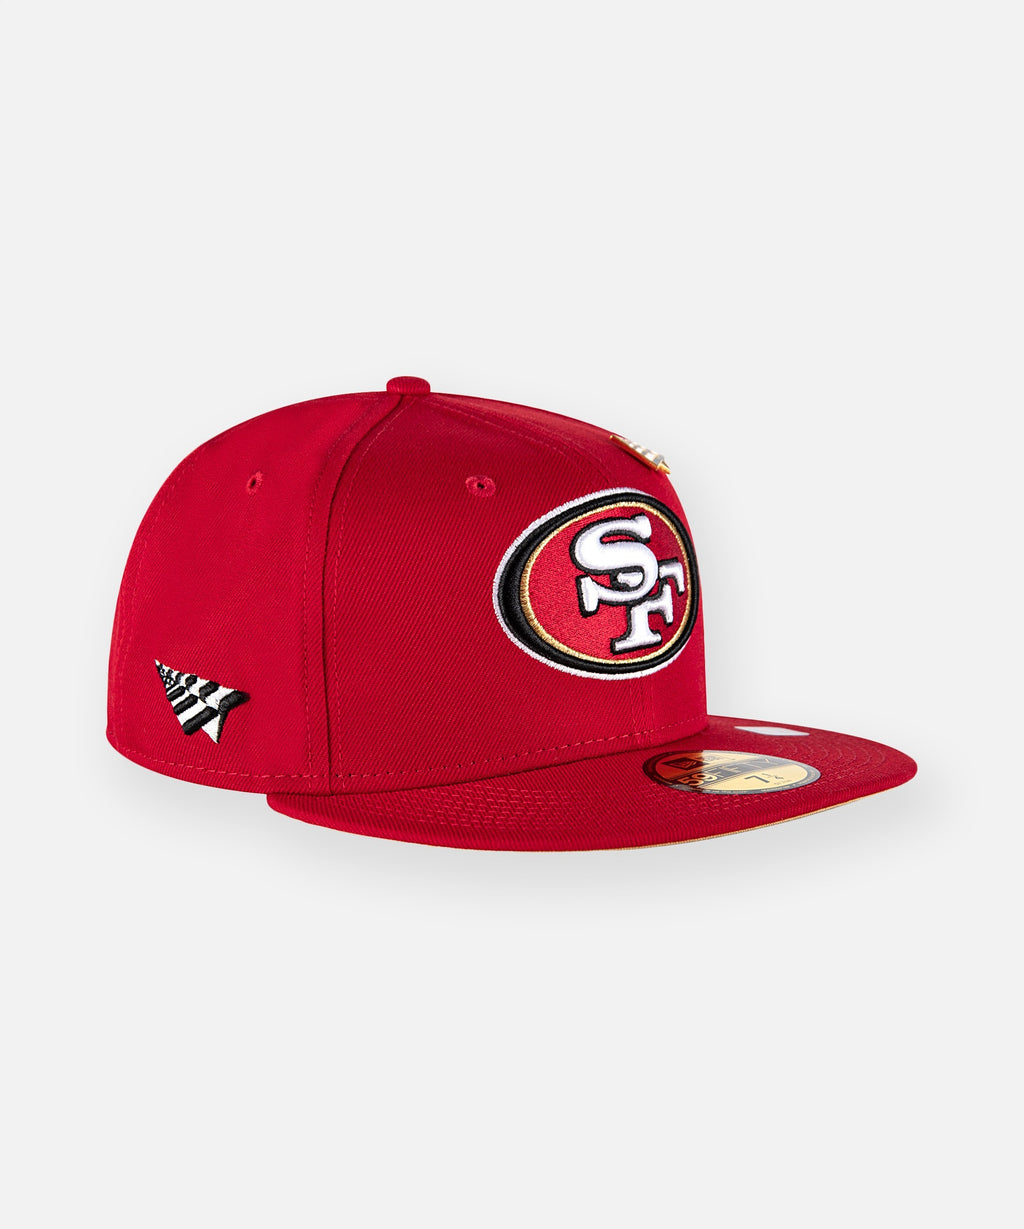 Paper Planes x San Francisco 49ers Team Color 59Fifty Fitted Hat_For Men_2